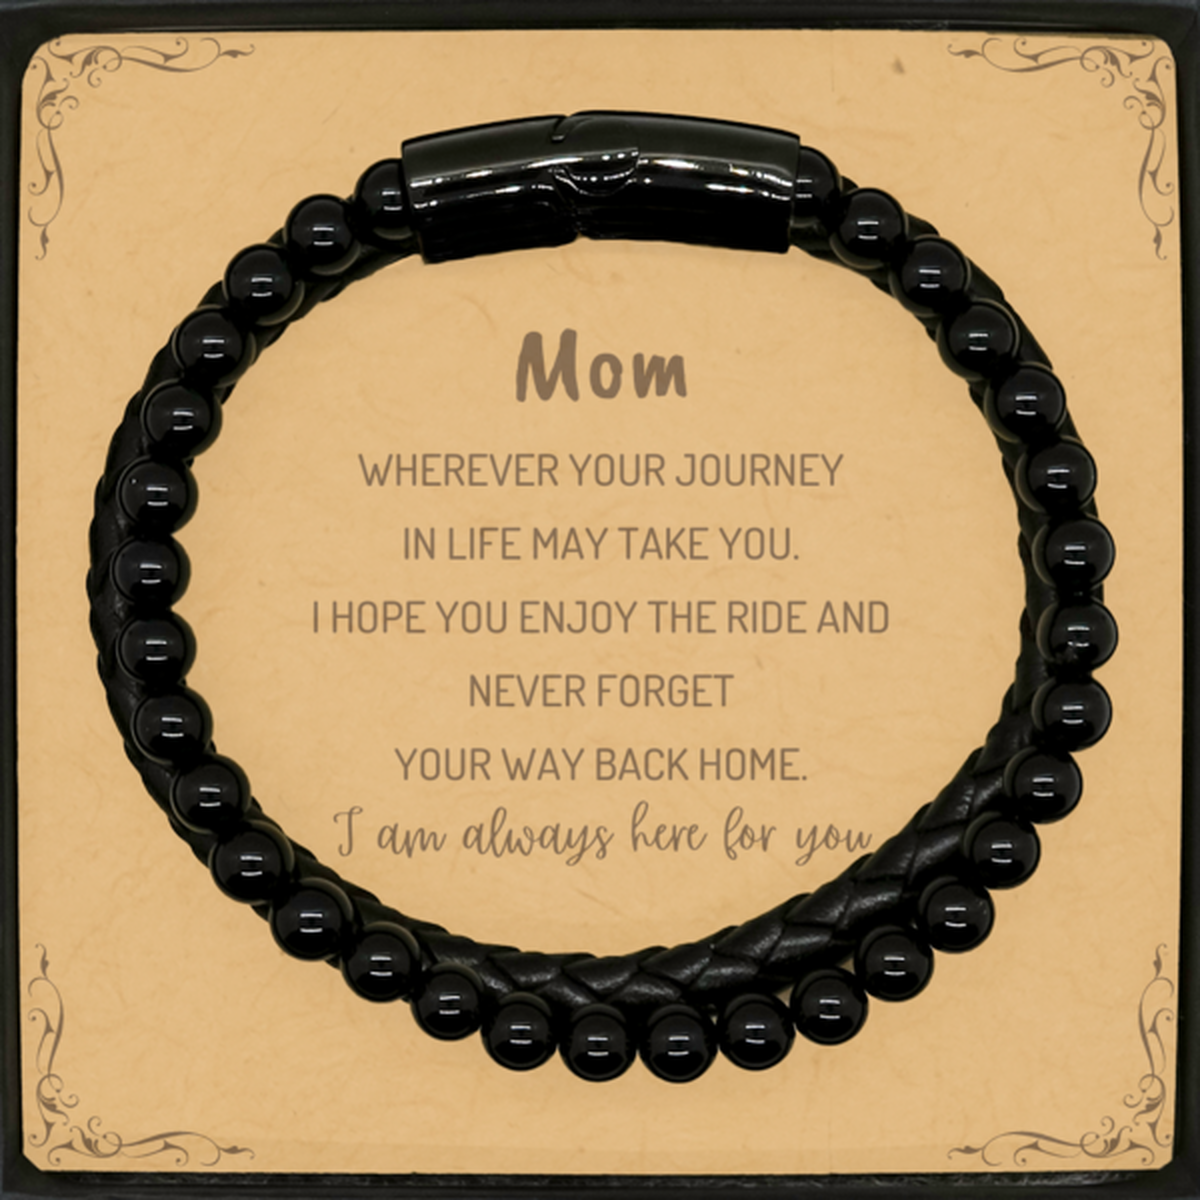 Mom wherever your journey in life may take you, I am always here for you Mom Stone Leather Bracelets, Awesome Christmas Gifts For Mom Message Card, Mom Birthday Gifts for Men Women Family Loved One